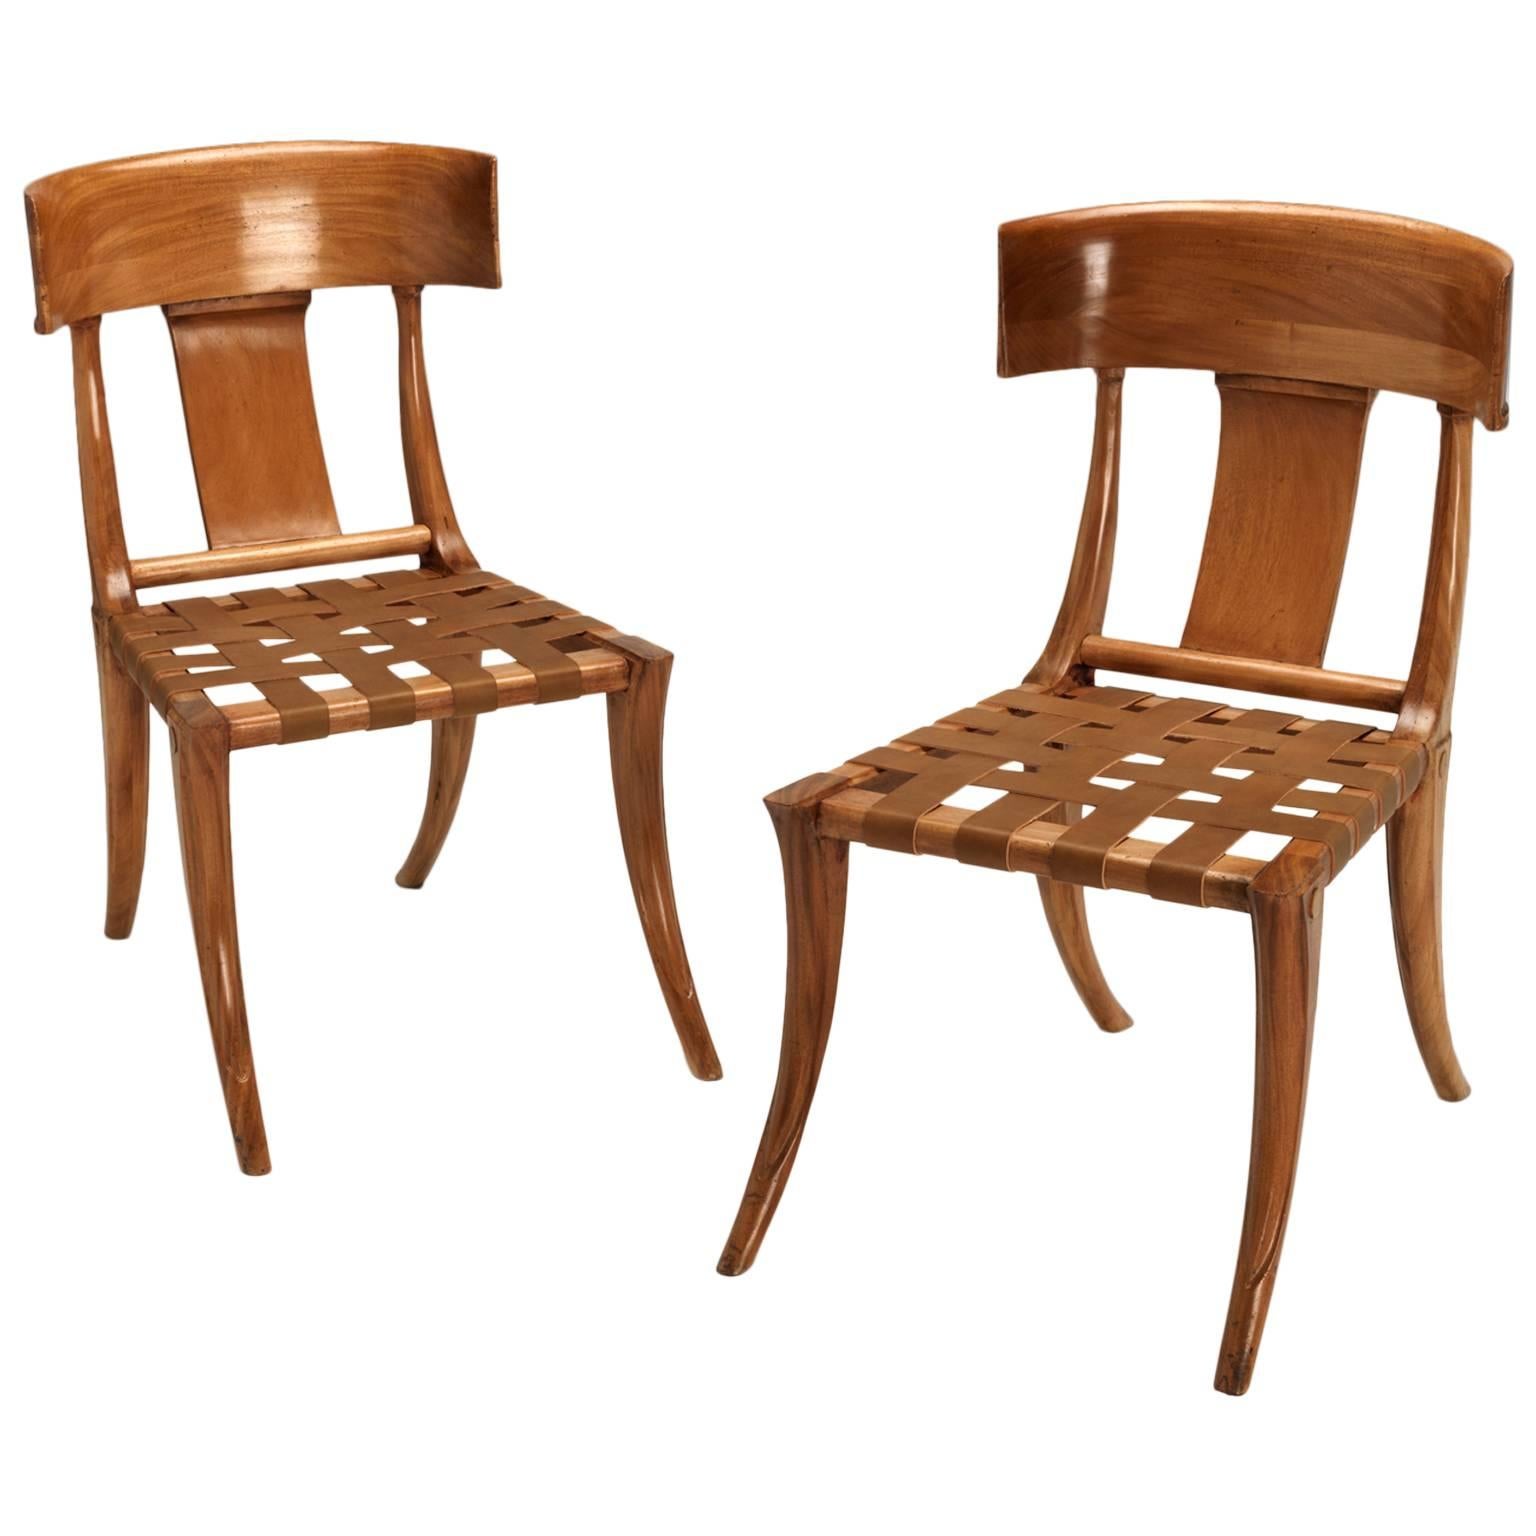 Klismos Chairs For Sale